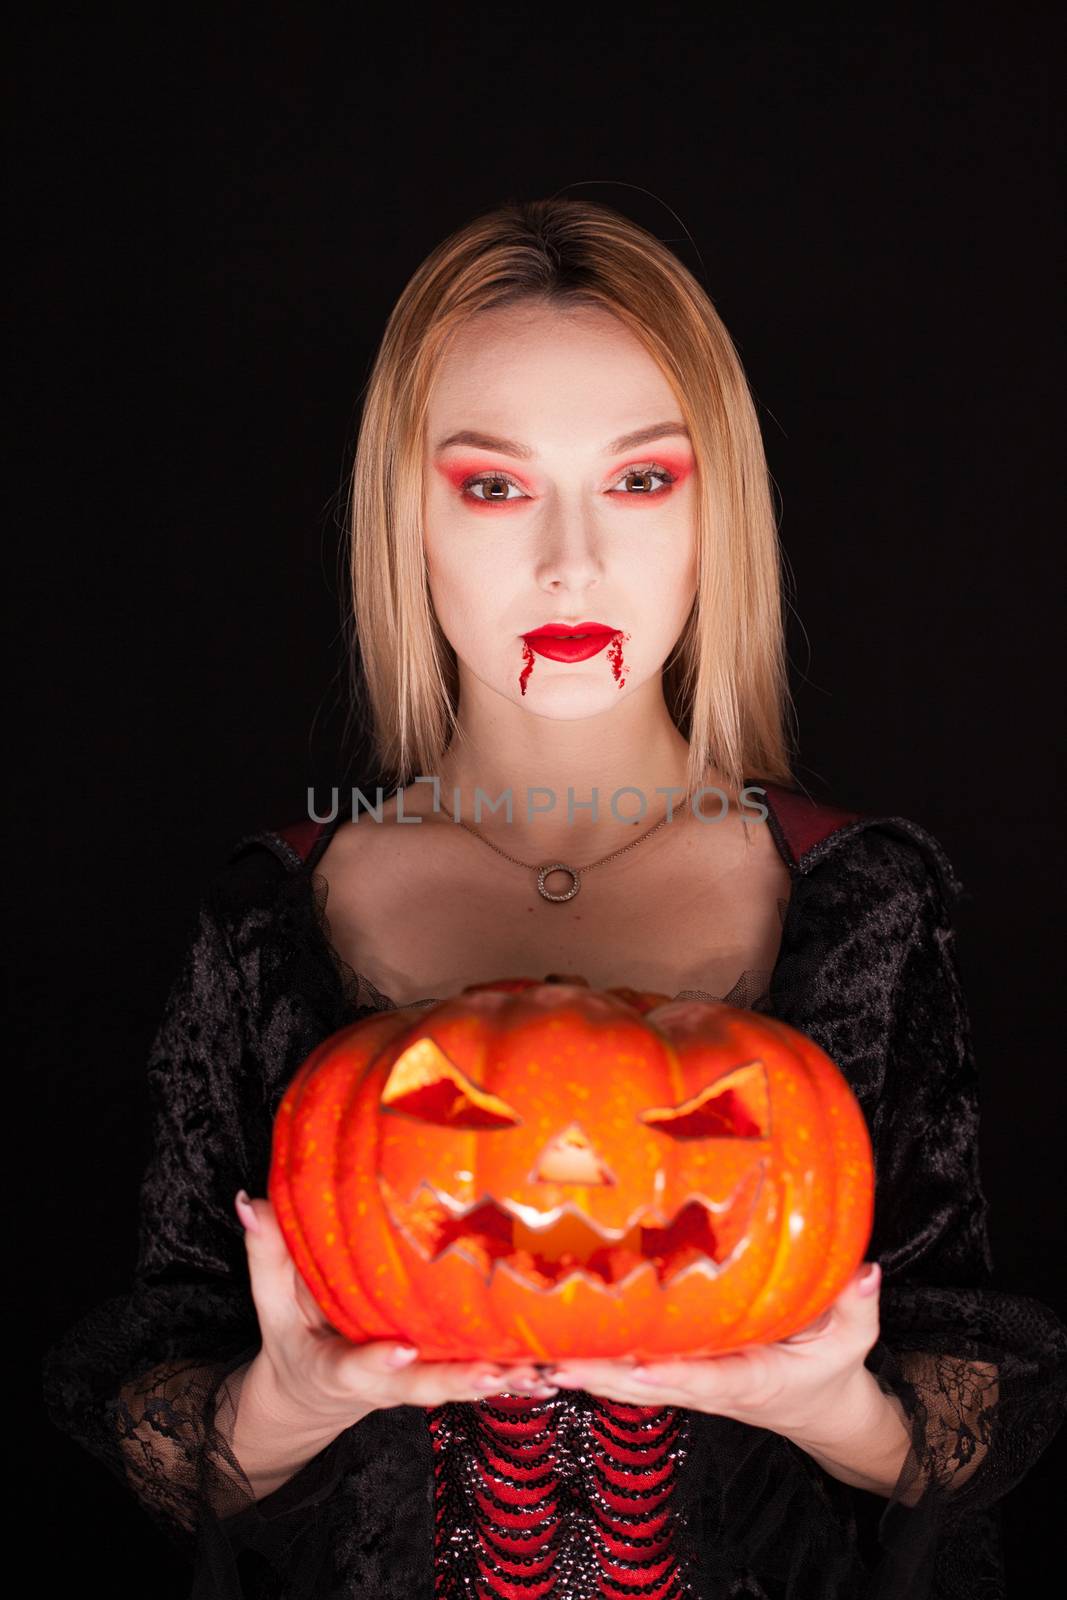 Beautiful girl dressed up like a vampire holding a pumpkin by DCStudio